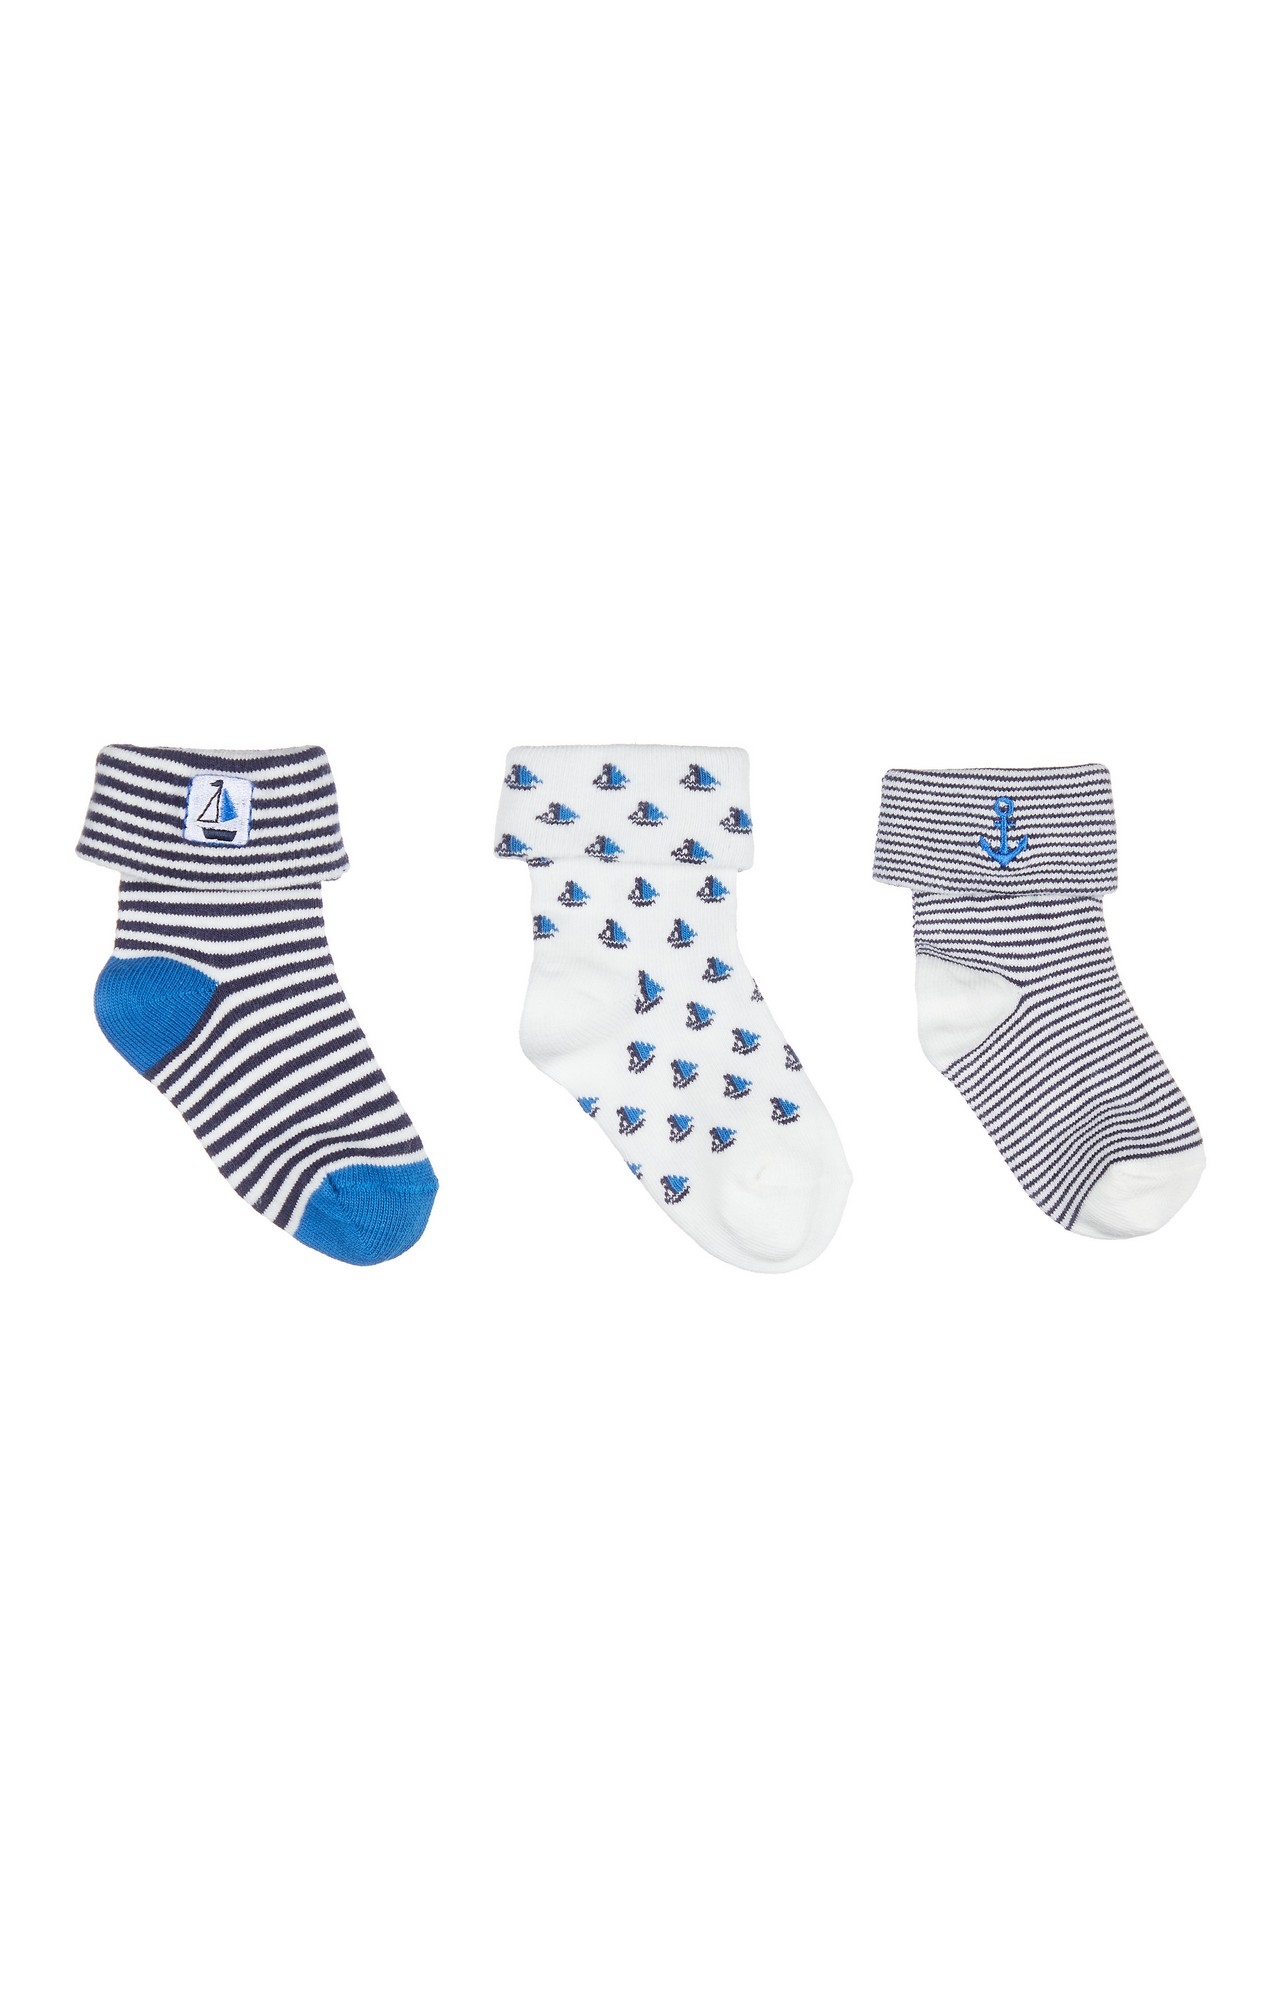 Mothercare | Blue Printed Socks - Pack of 3 0